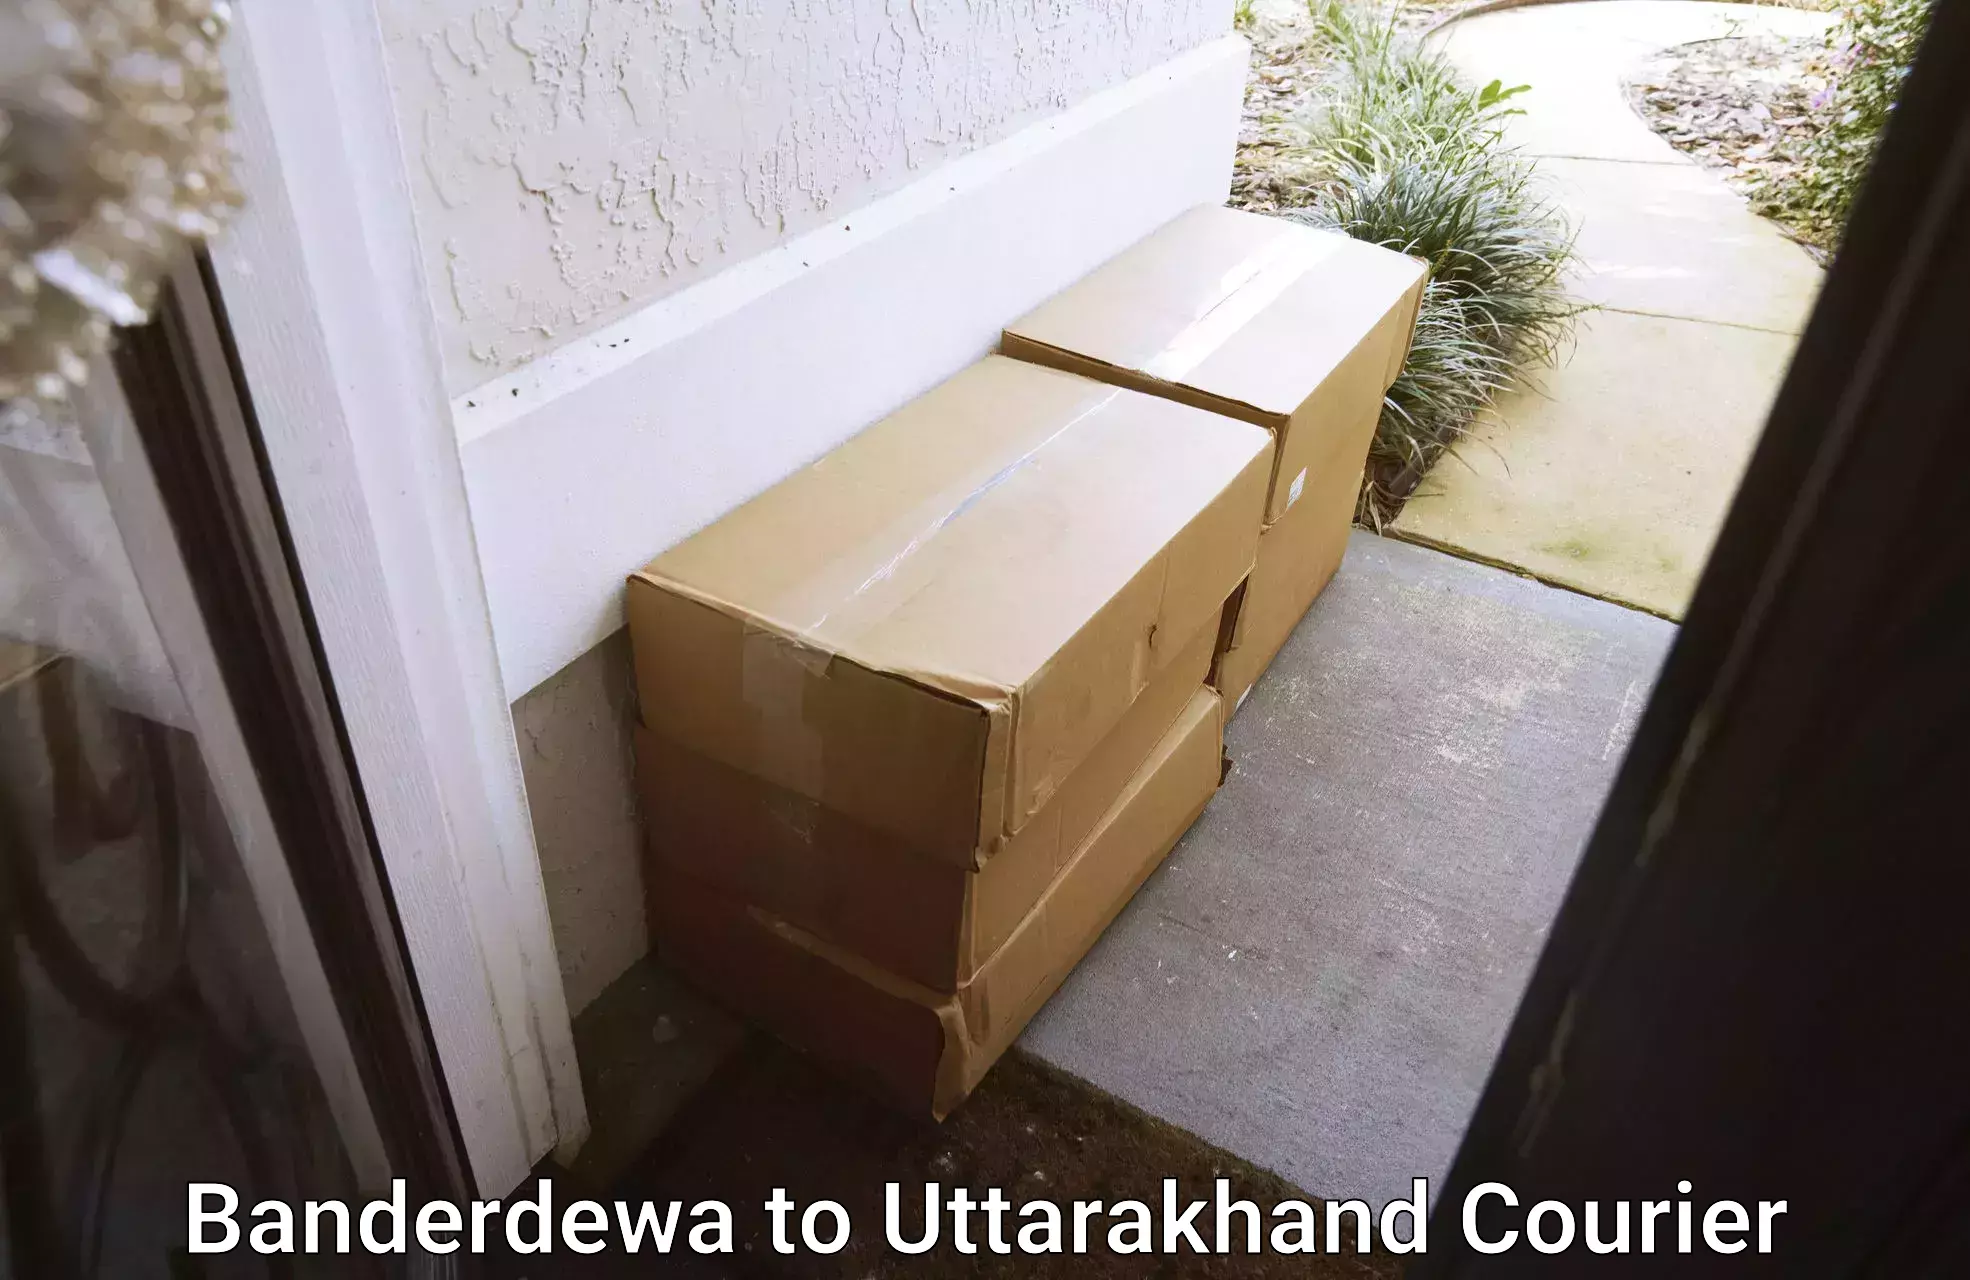 Full-service courier options Banderdewa to Bhagwanpur